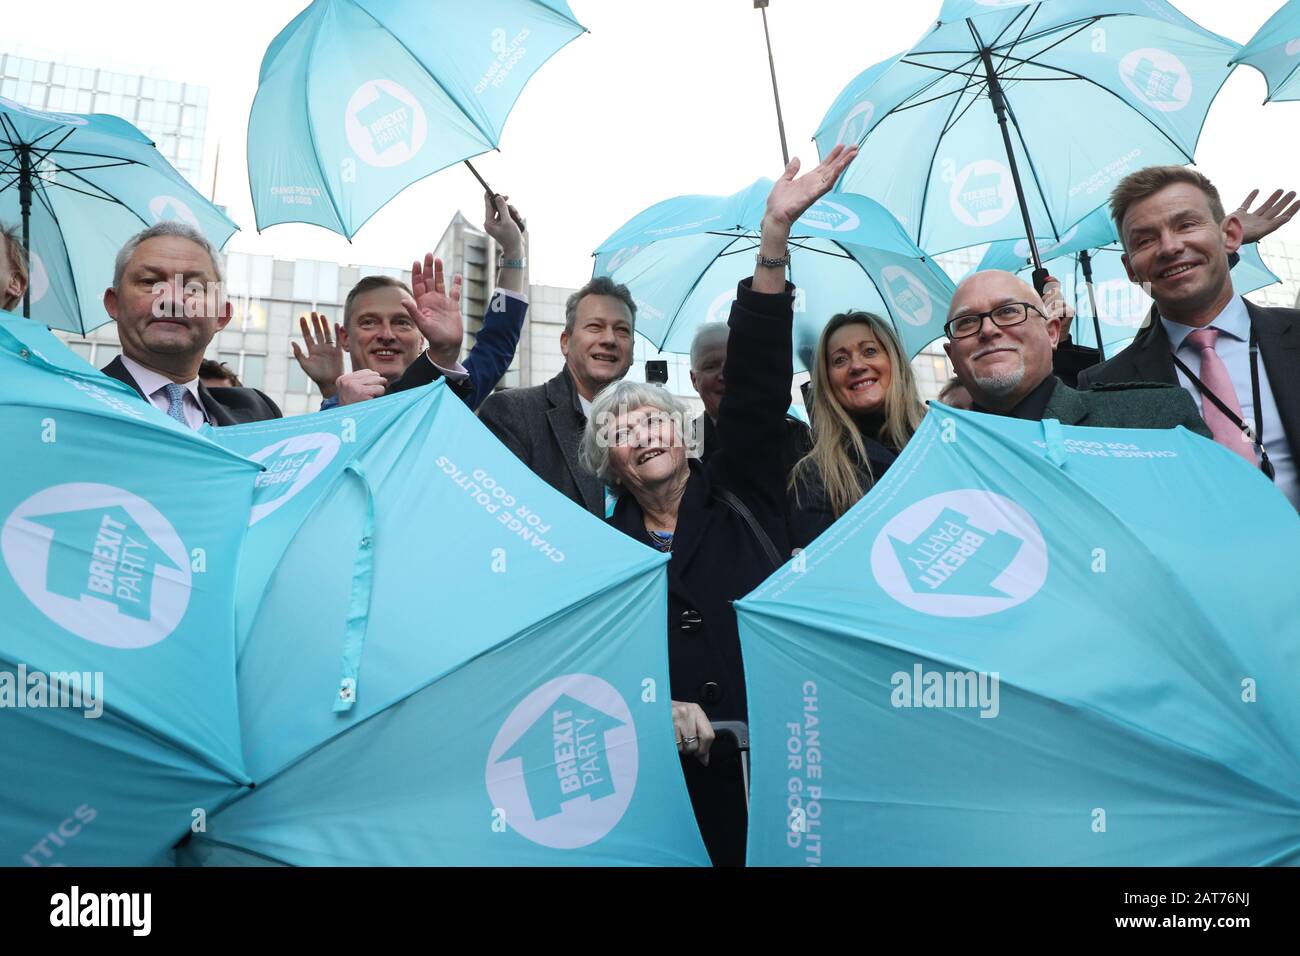 Ann Widdecombe (centre) member of the European Parliament (MEP) for South West England, reacts with other members of the Brexit party as they leave en masse from the European Parliament in Brussels, Belgium, ahead of the UK departing the European Union at 11pm on Friday. Stock Photo